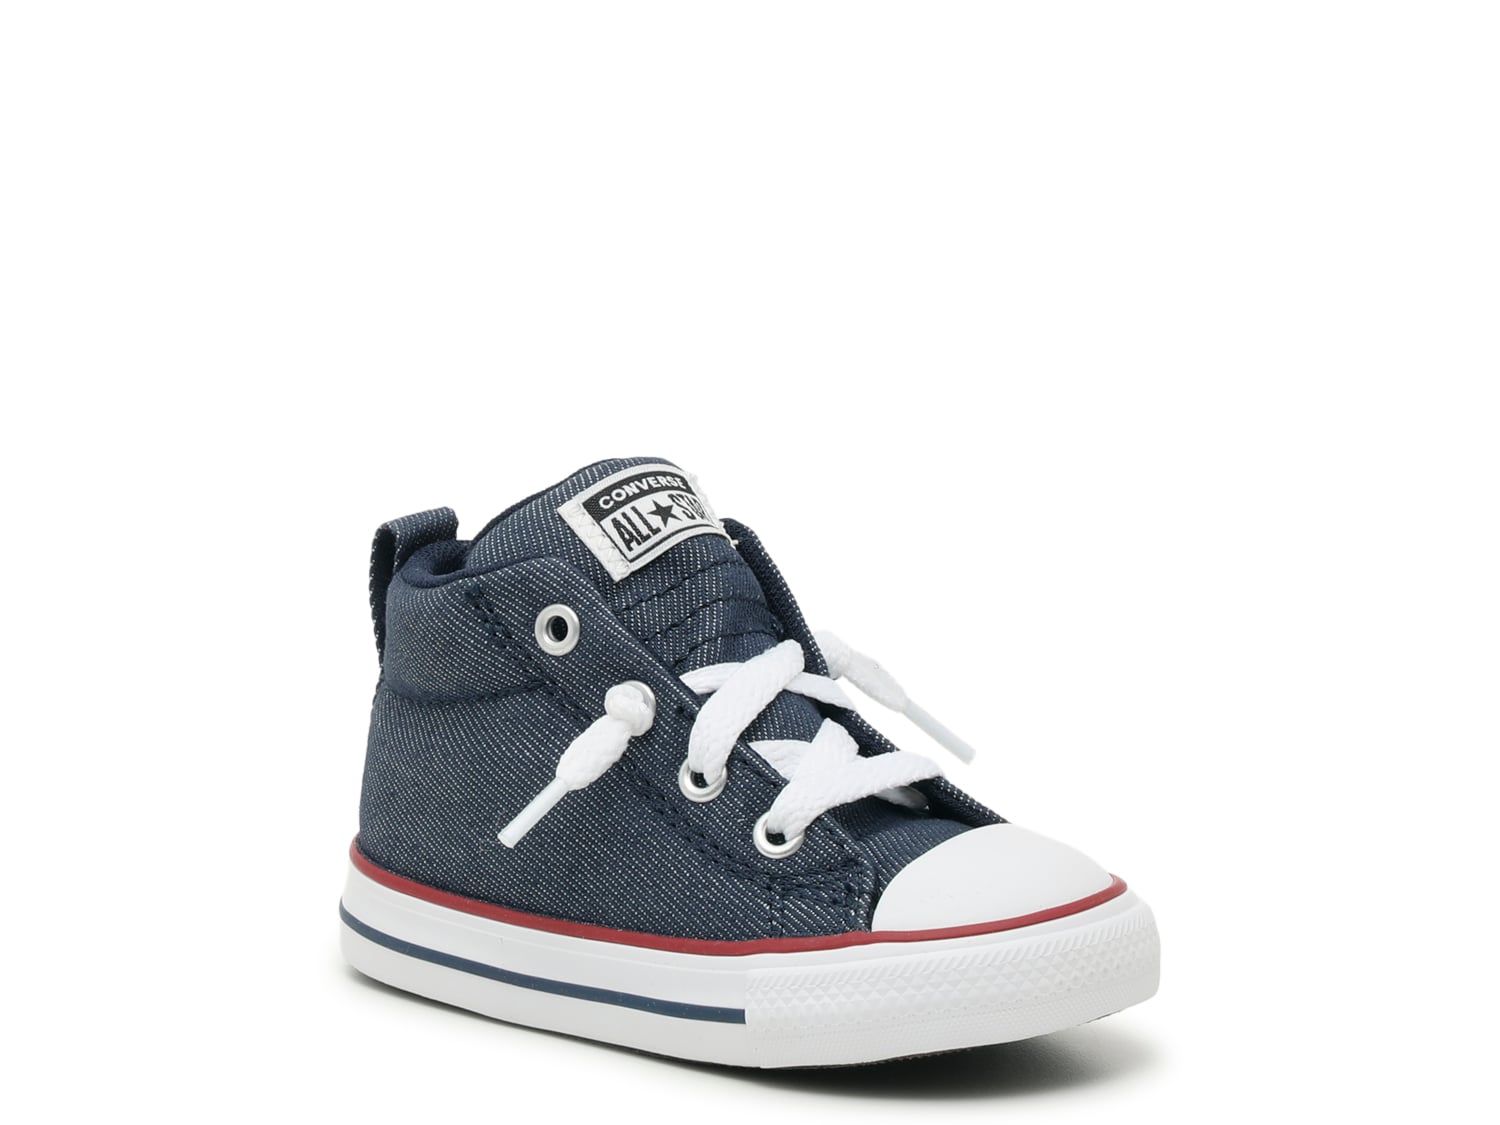 Chuck Taylor All-Star Street High-Top Sneaker - Kids' - Free Shipping DSW